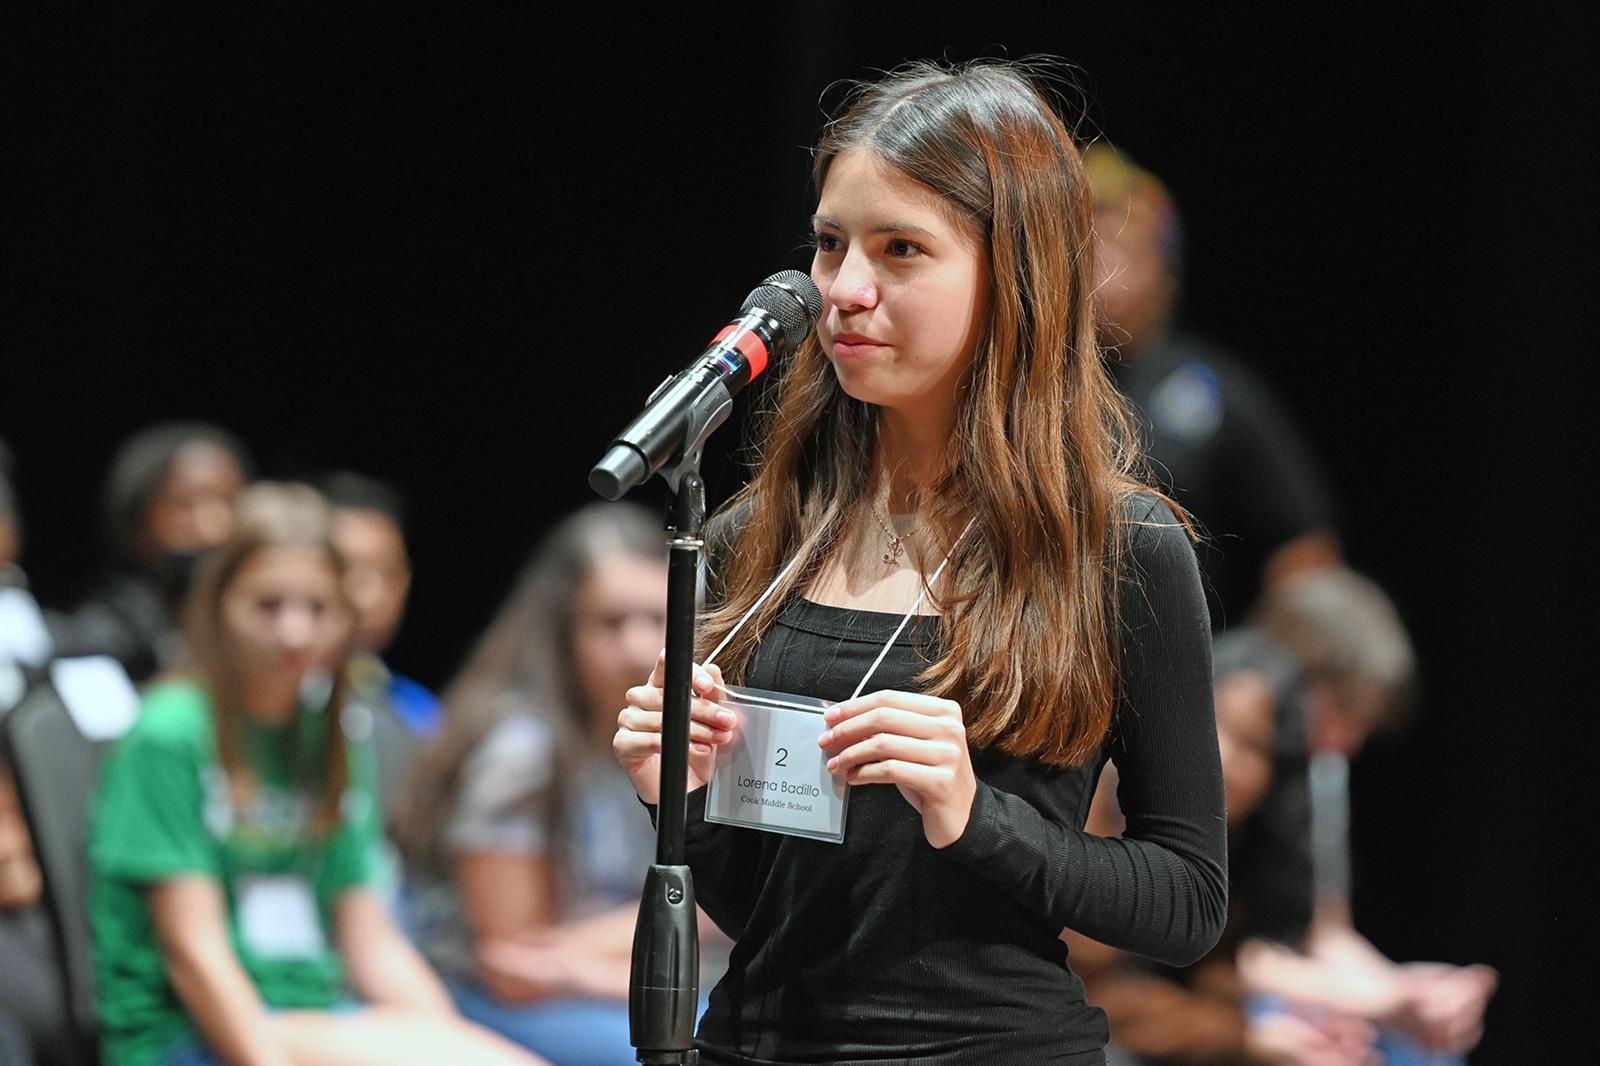 Cook 8th grade student wins Middle School Spelling Bee crown.